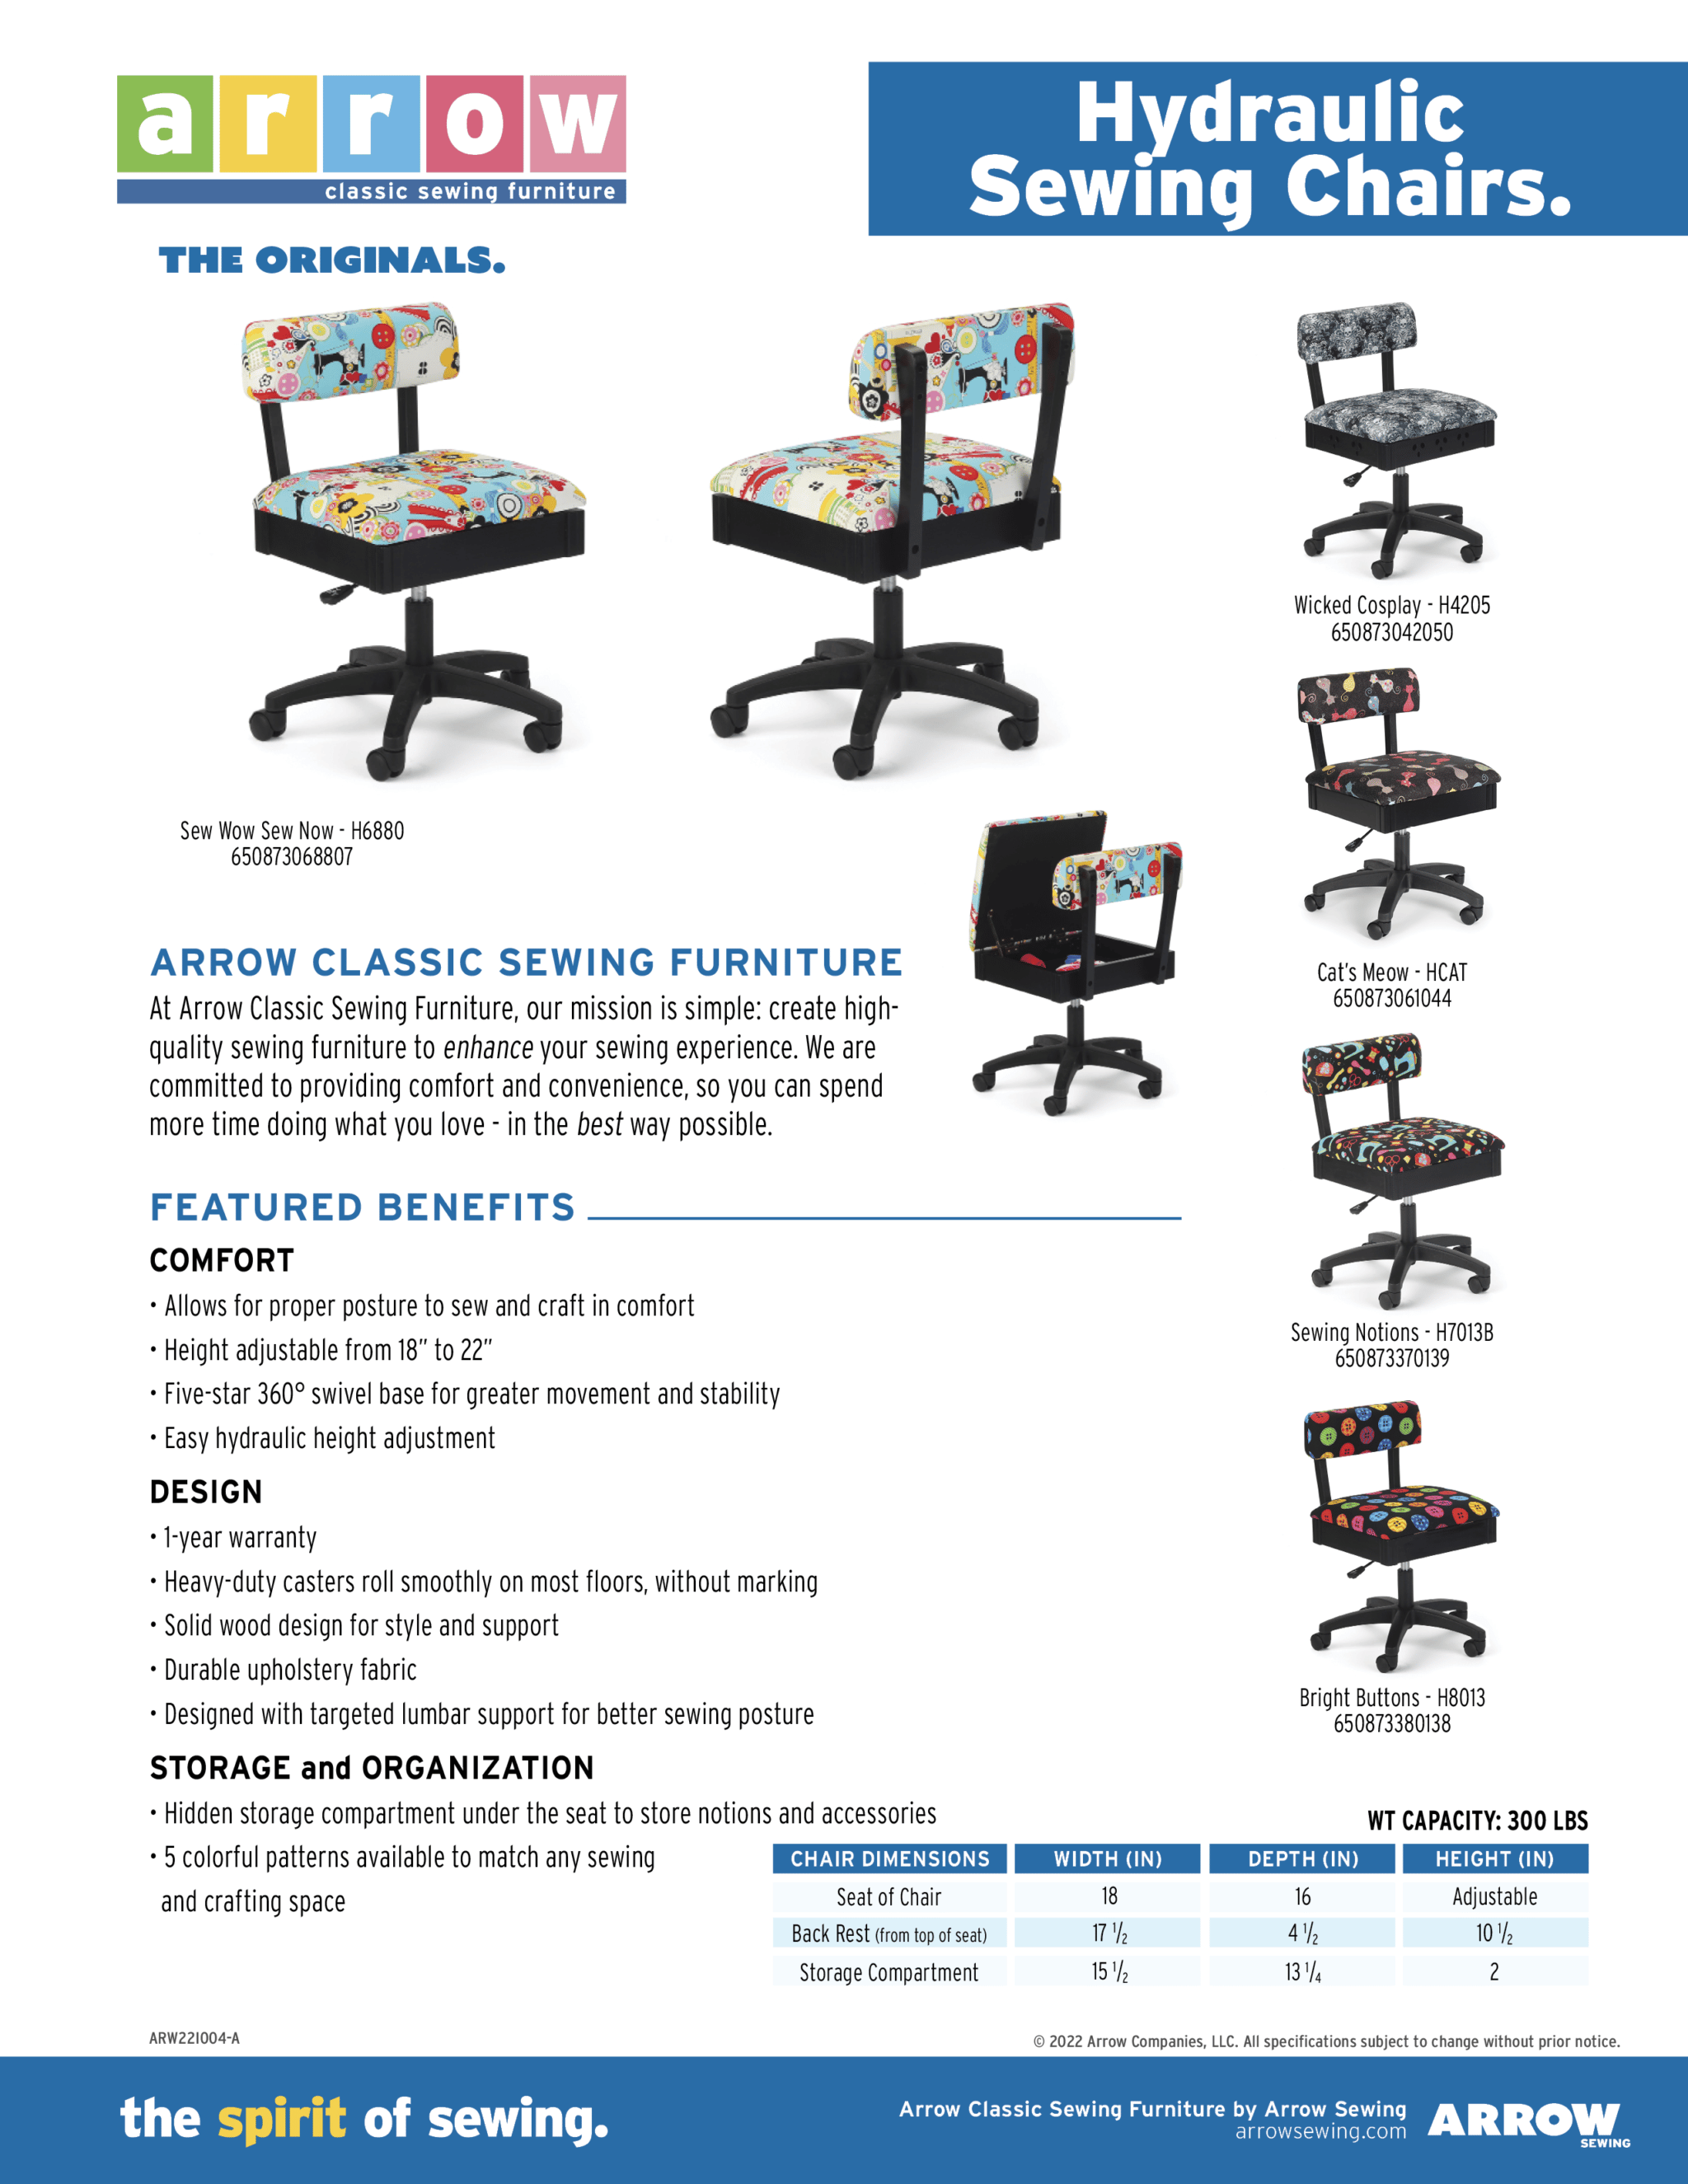 Hydraulic Sewing Chairs product sheet